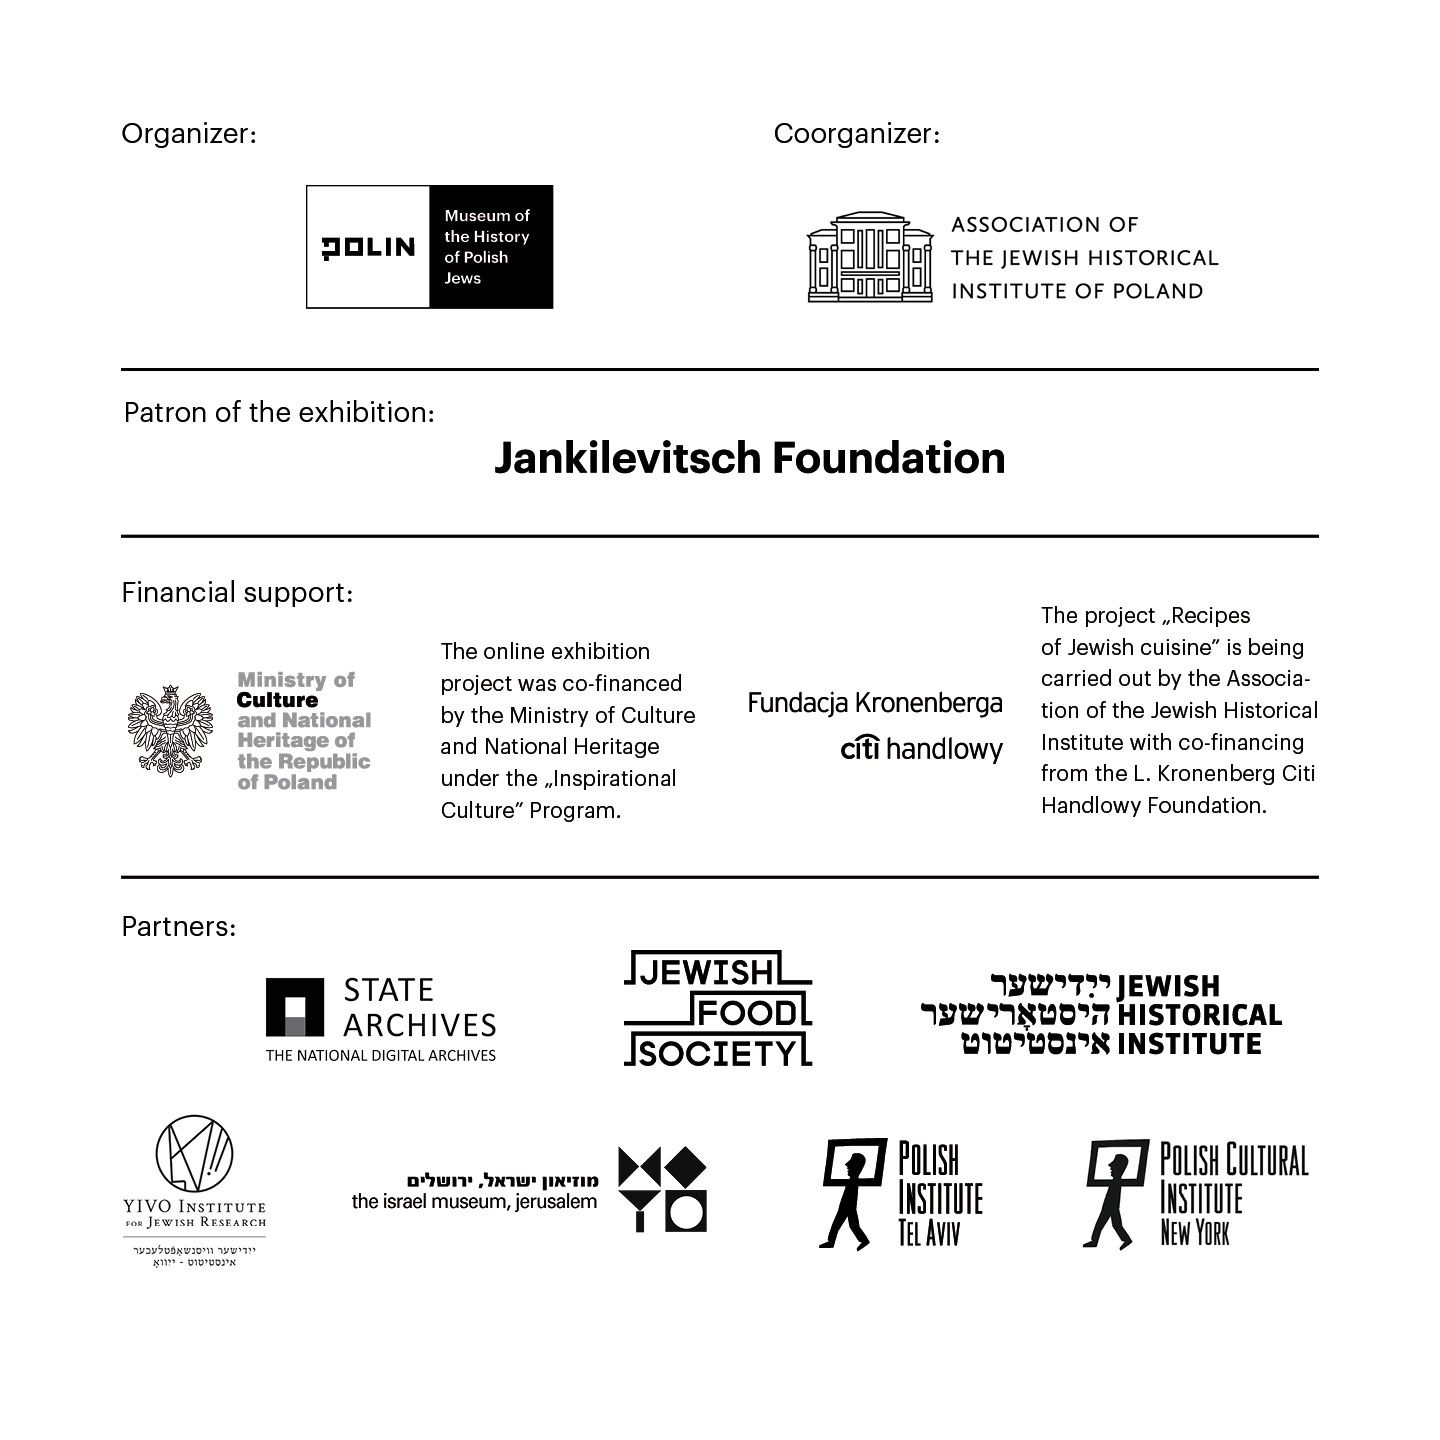 Logos of organizers, coorganizers, patrons and partners of What's Cooking online exhibition, f.e. POLIN Museum, Association of the Jewish Historical Institute of Poland, Jankilevitsch Foundation, Ministry of Culture and Cultural Heritage of Poland, and many more